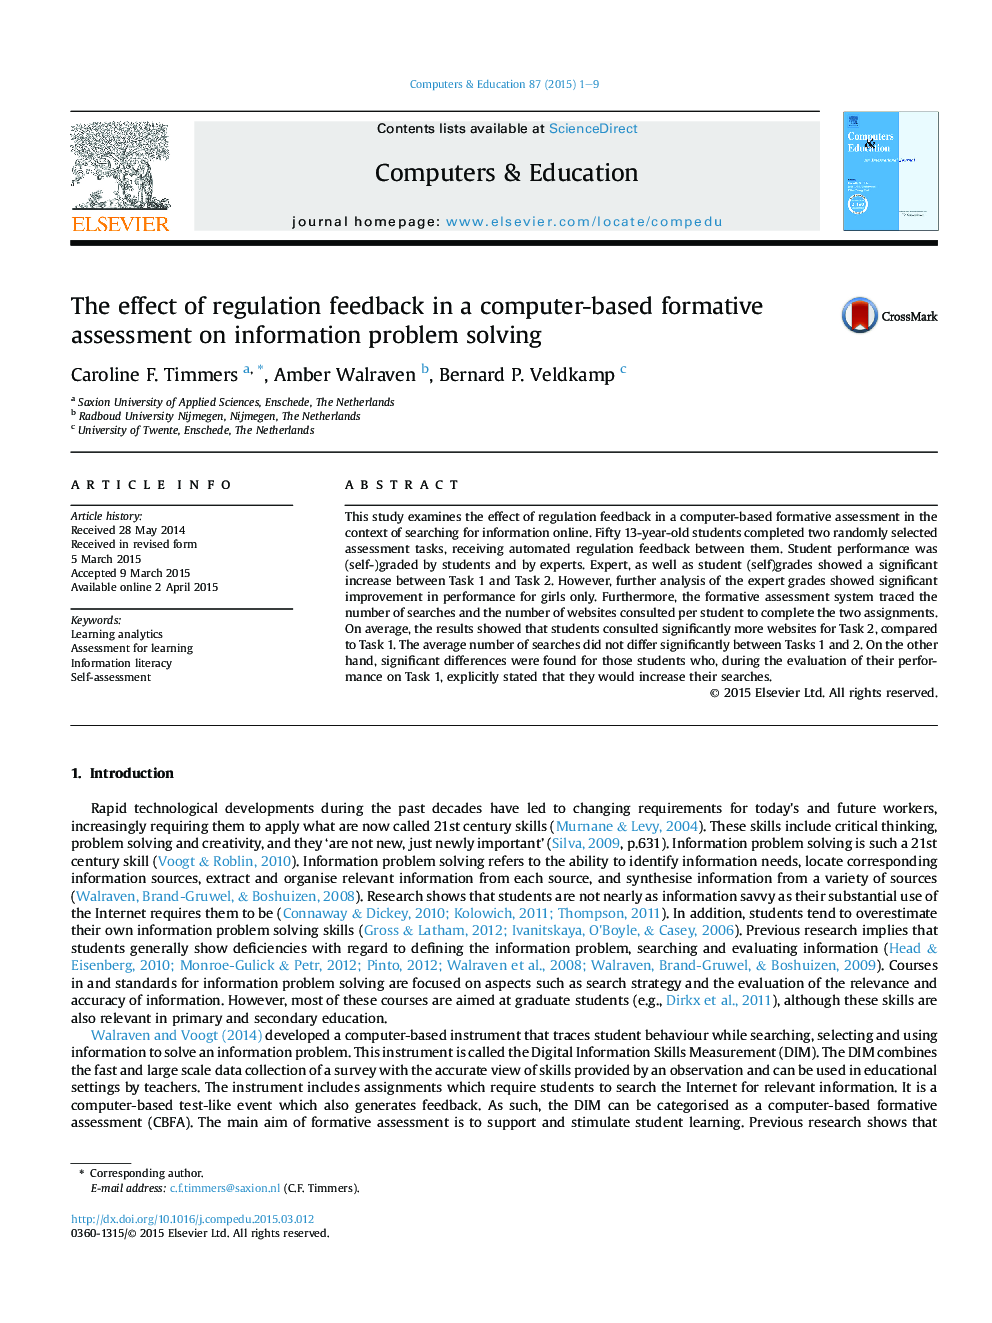 The effect of regulation feedback in a computer-based formative assessment on information problem solving